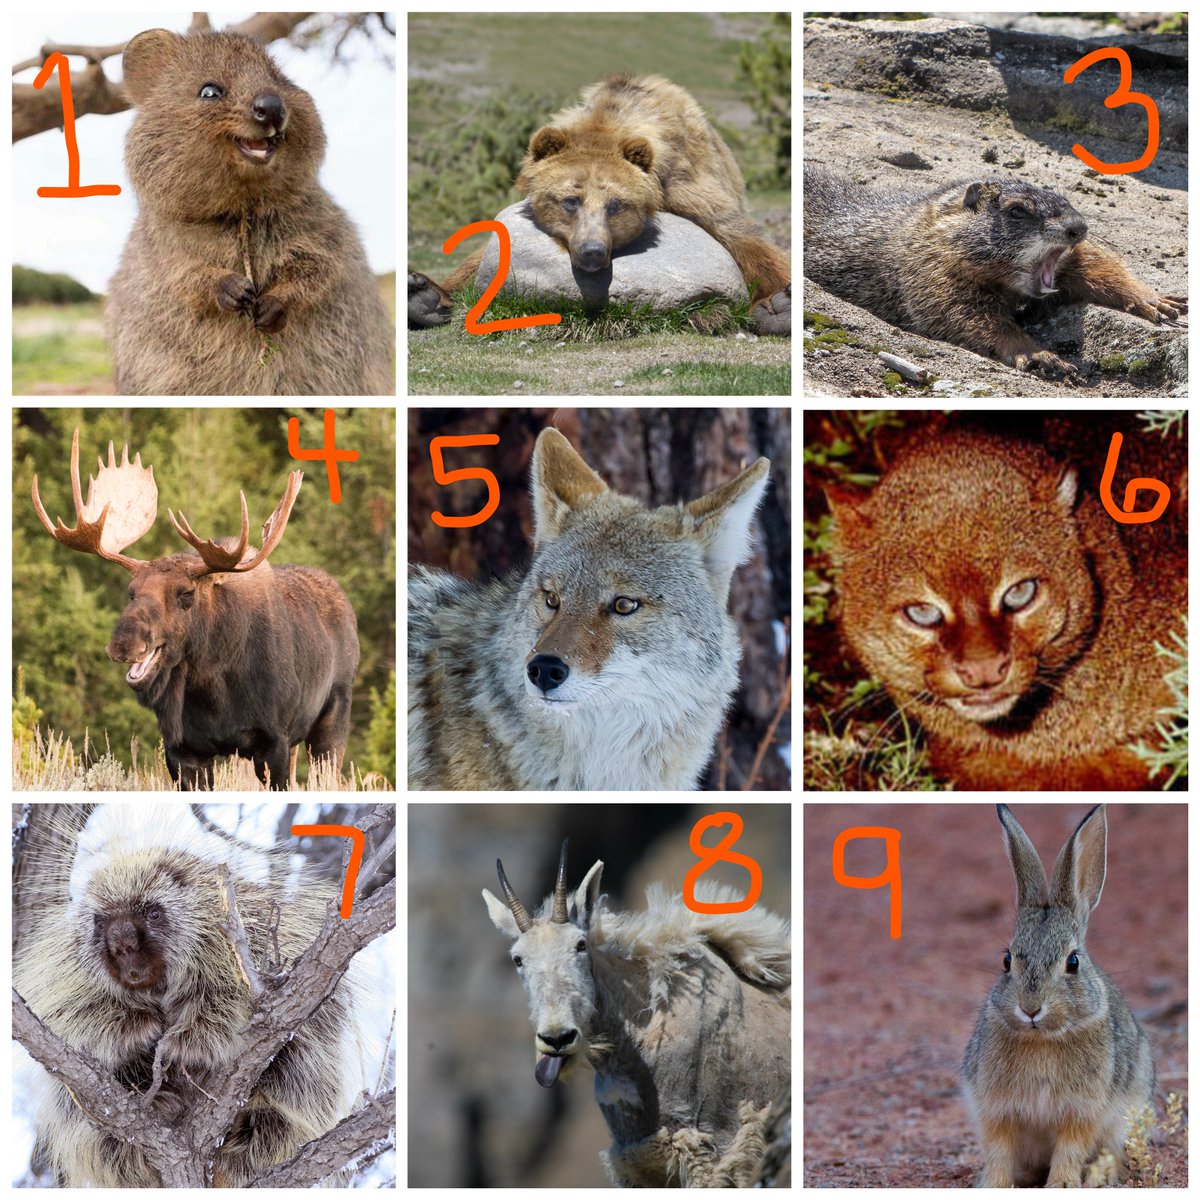 Sierra Club Using This Random Scale Of Animal Expressions Please Let Us Know How You Re Feeling Today Photos Courtesy Of Natlparkservice Usfws Istock T Co Hhgtibu1m3